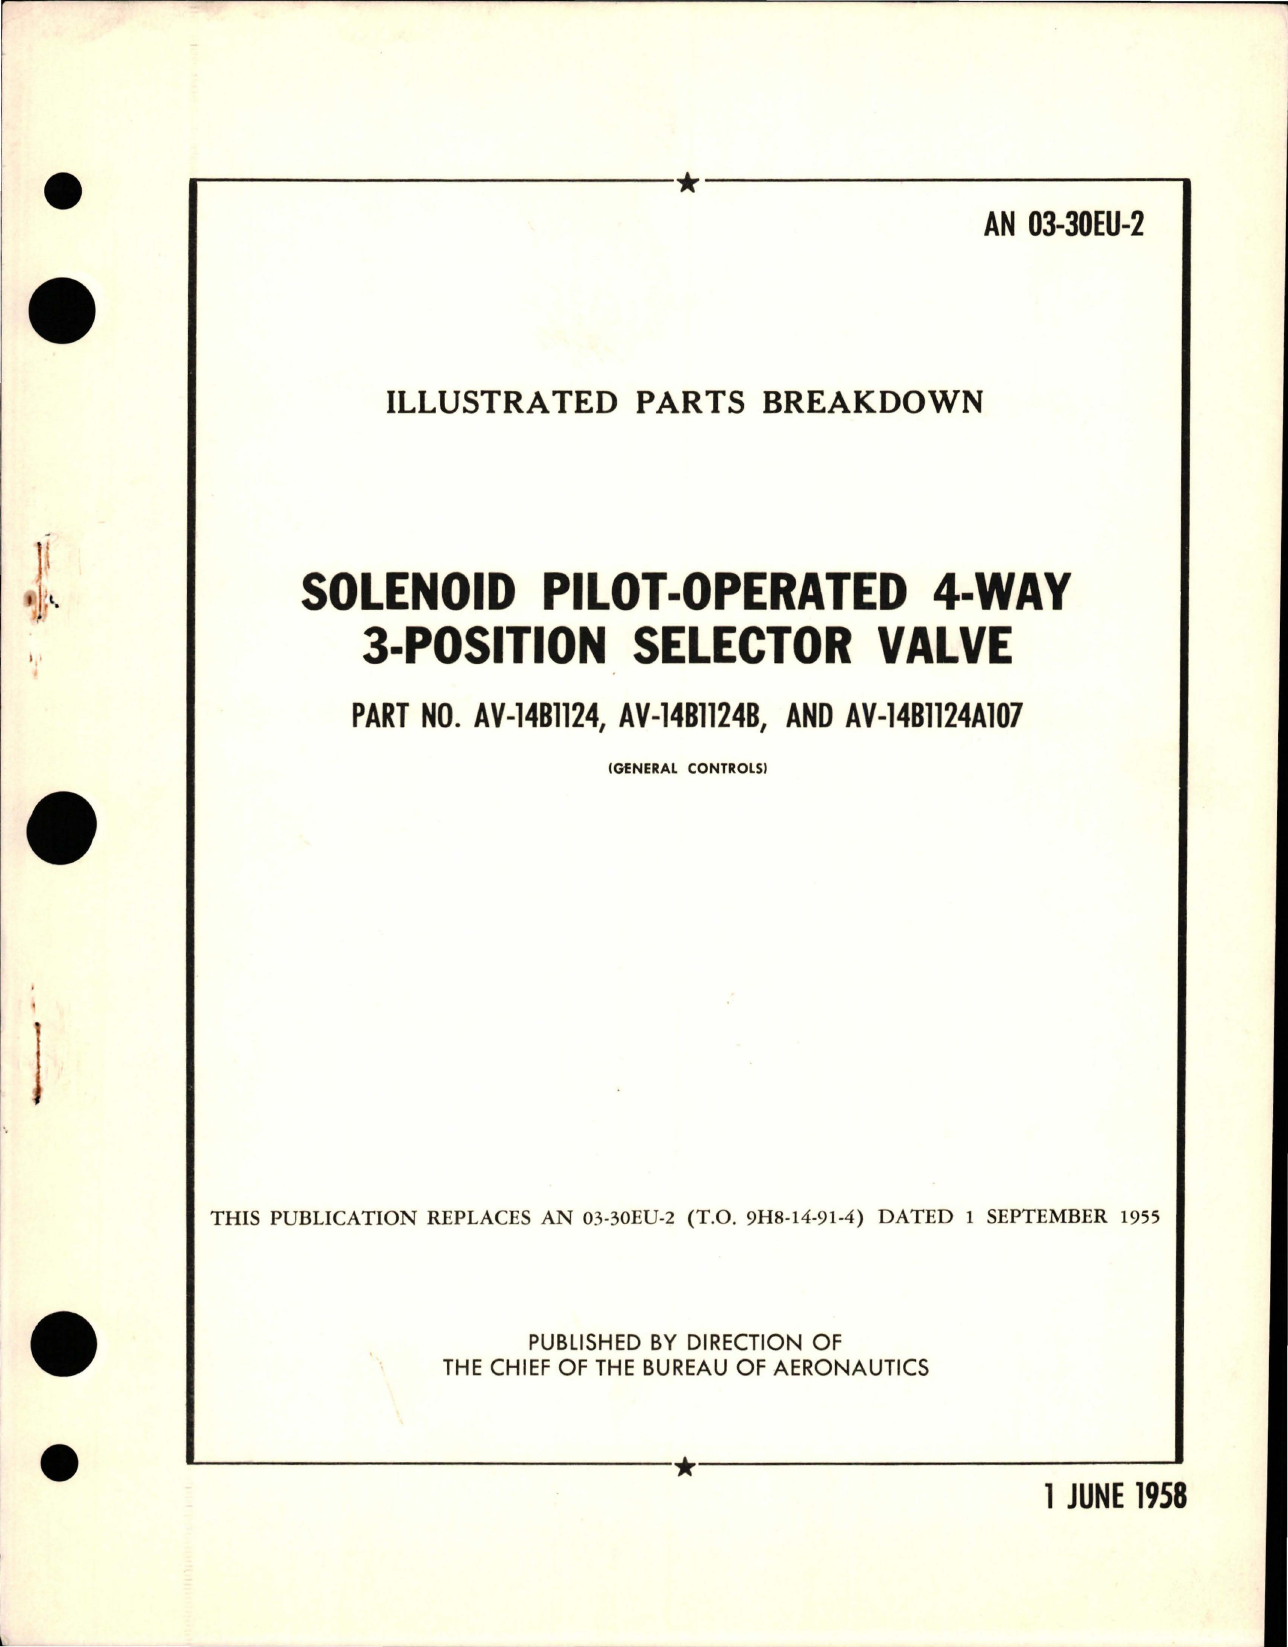 Sample page 1 from AirCorps Library document: Illustrated Parts Breakdown for Solenoid Pilot-Operated 4-Way 3-Position Selector Valve 